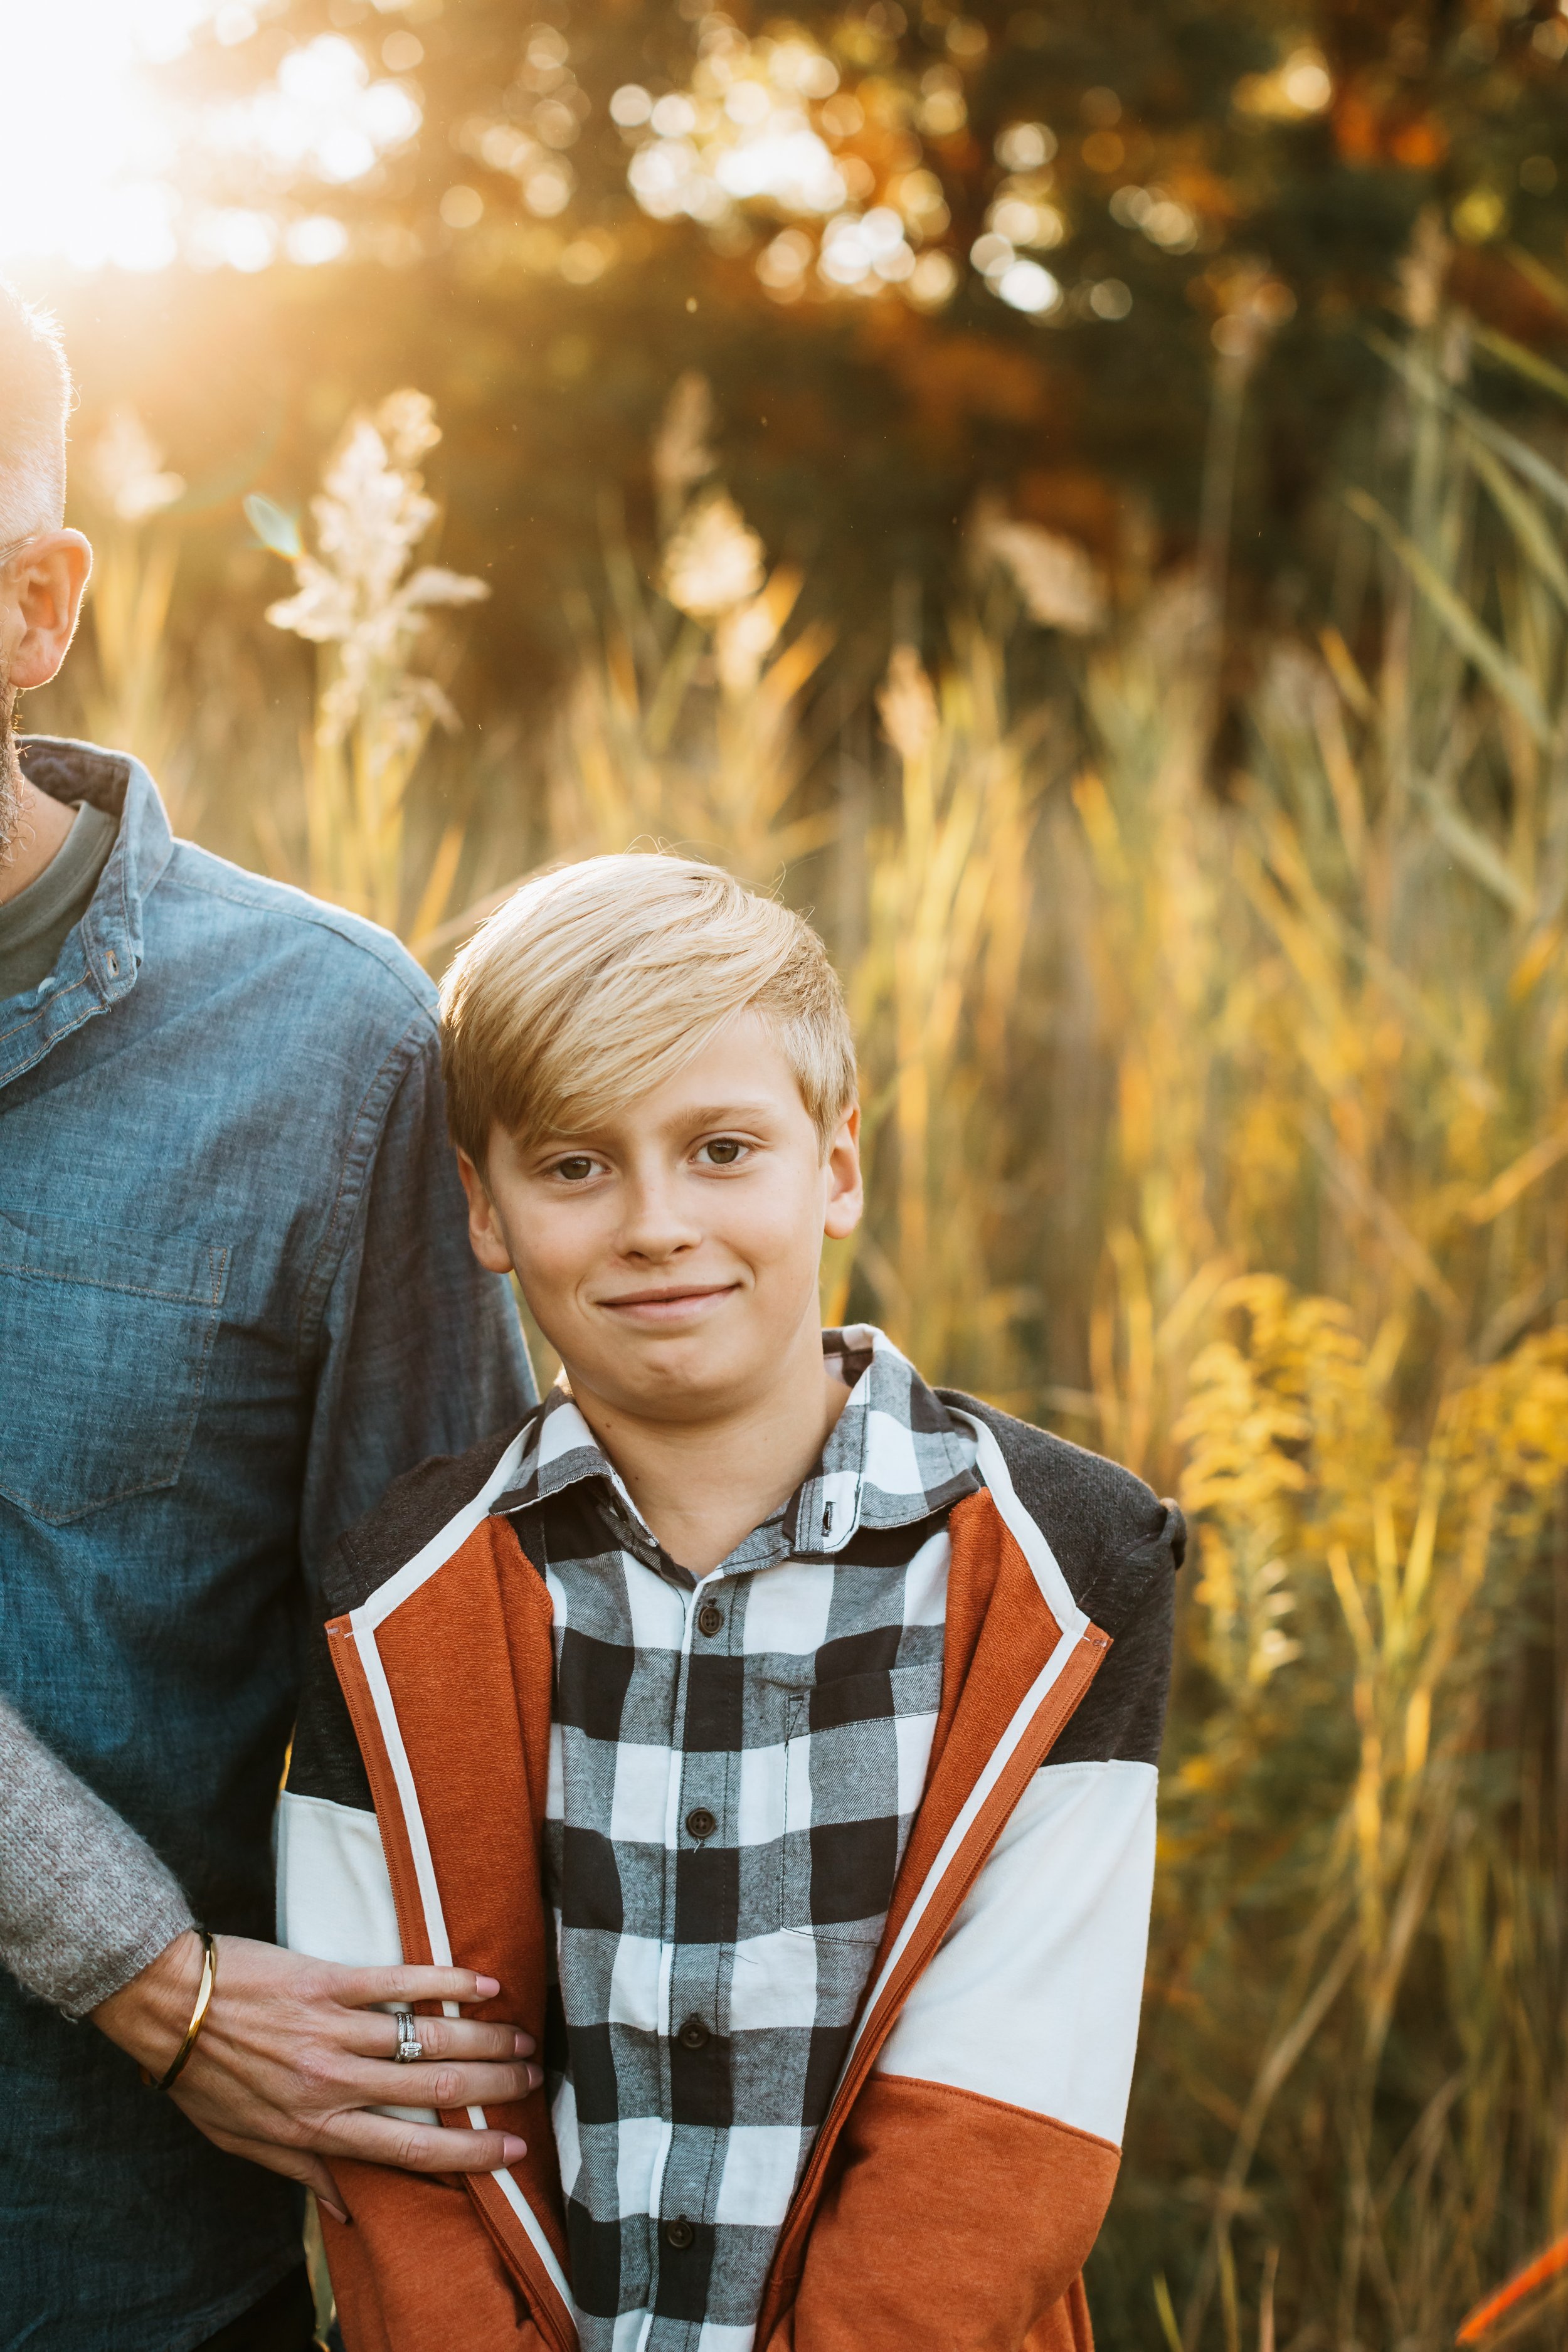  Sunset portraits in the Illinois Valley with yellow grass by Teala Ward Photography. sunset face portraits #TealaWardPhotography #TealaWardFamilies #IllinoisValleyfamilypics #fursibiling #Illinoisfamilyphotography #brother&amp;sister 